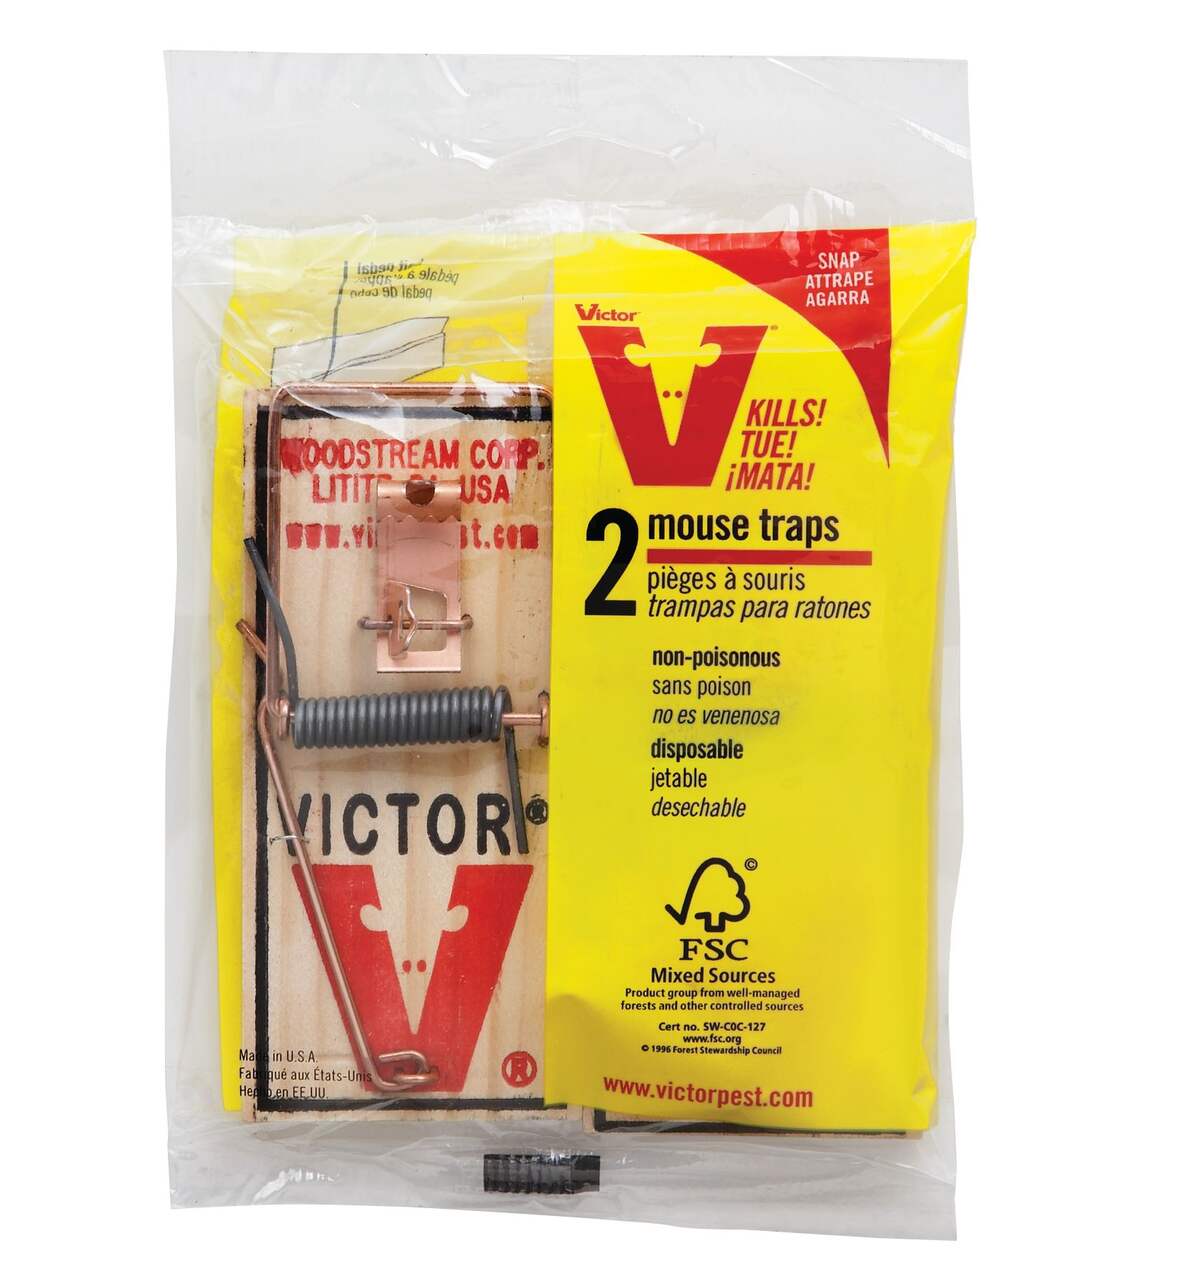 Victor Wood Metal-Pedal Mouse Trap (2 Count)